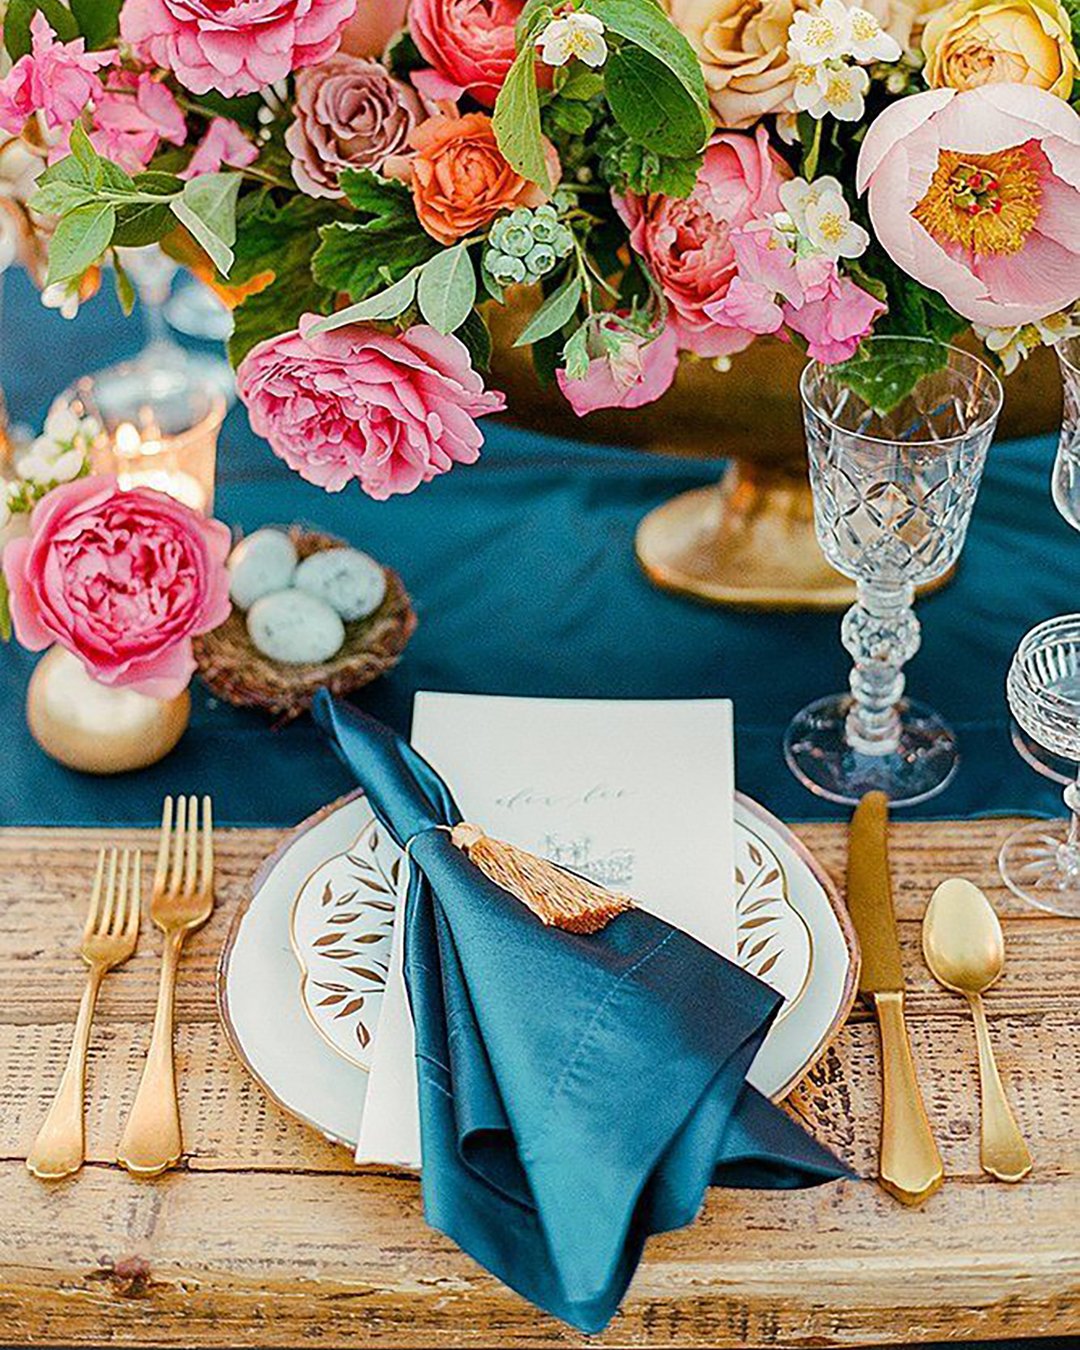 fall wedding decorations vibrant floral centerpieces rebeccayalephotography